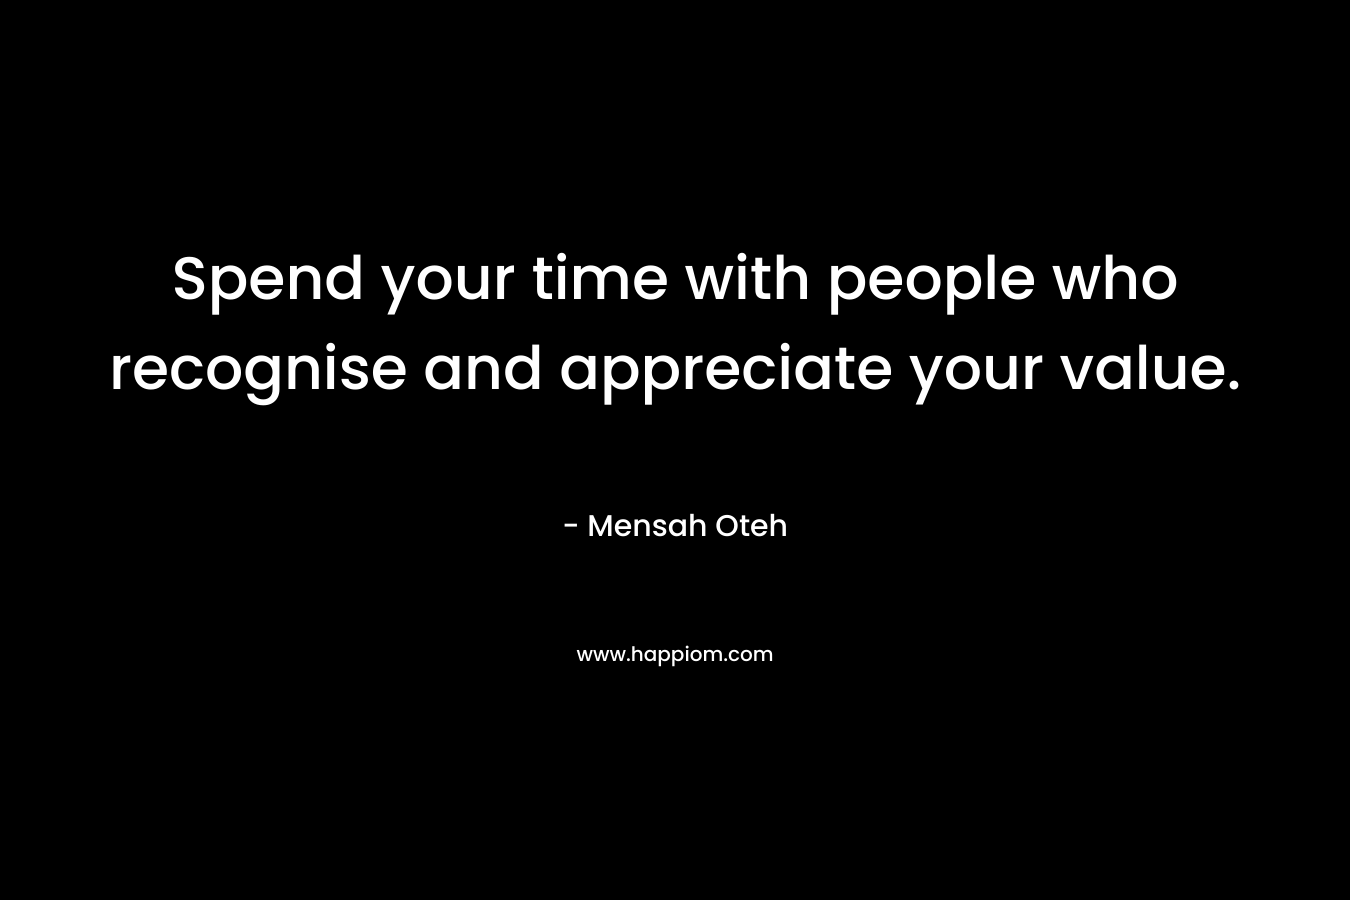 Spend your time with people who recognise and appreciate your value.